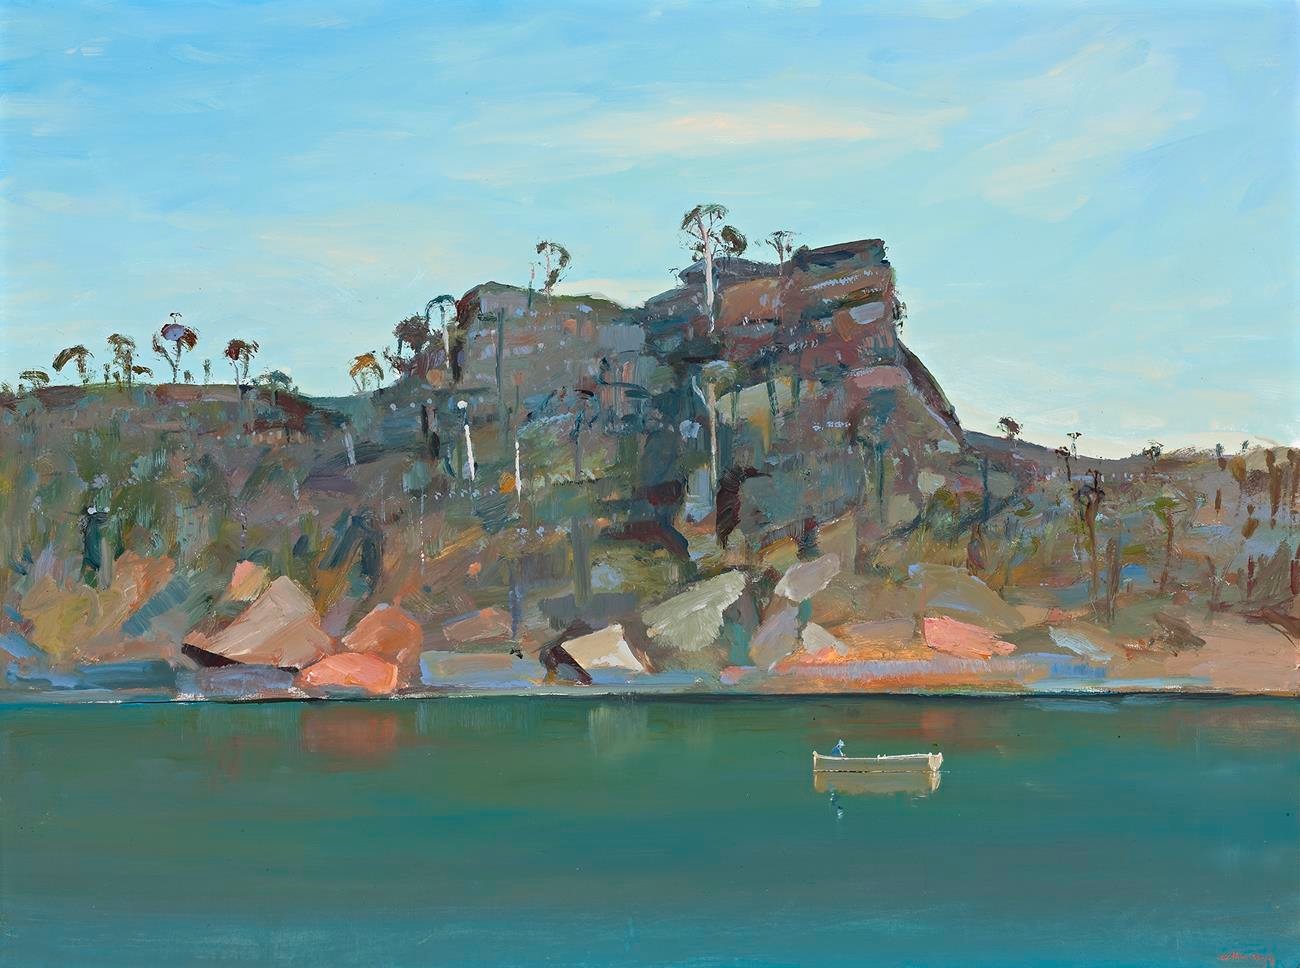 SHOALHAVEN RIVER WITH BOAT by Arthur Boyd, circa 1980